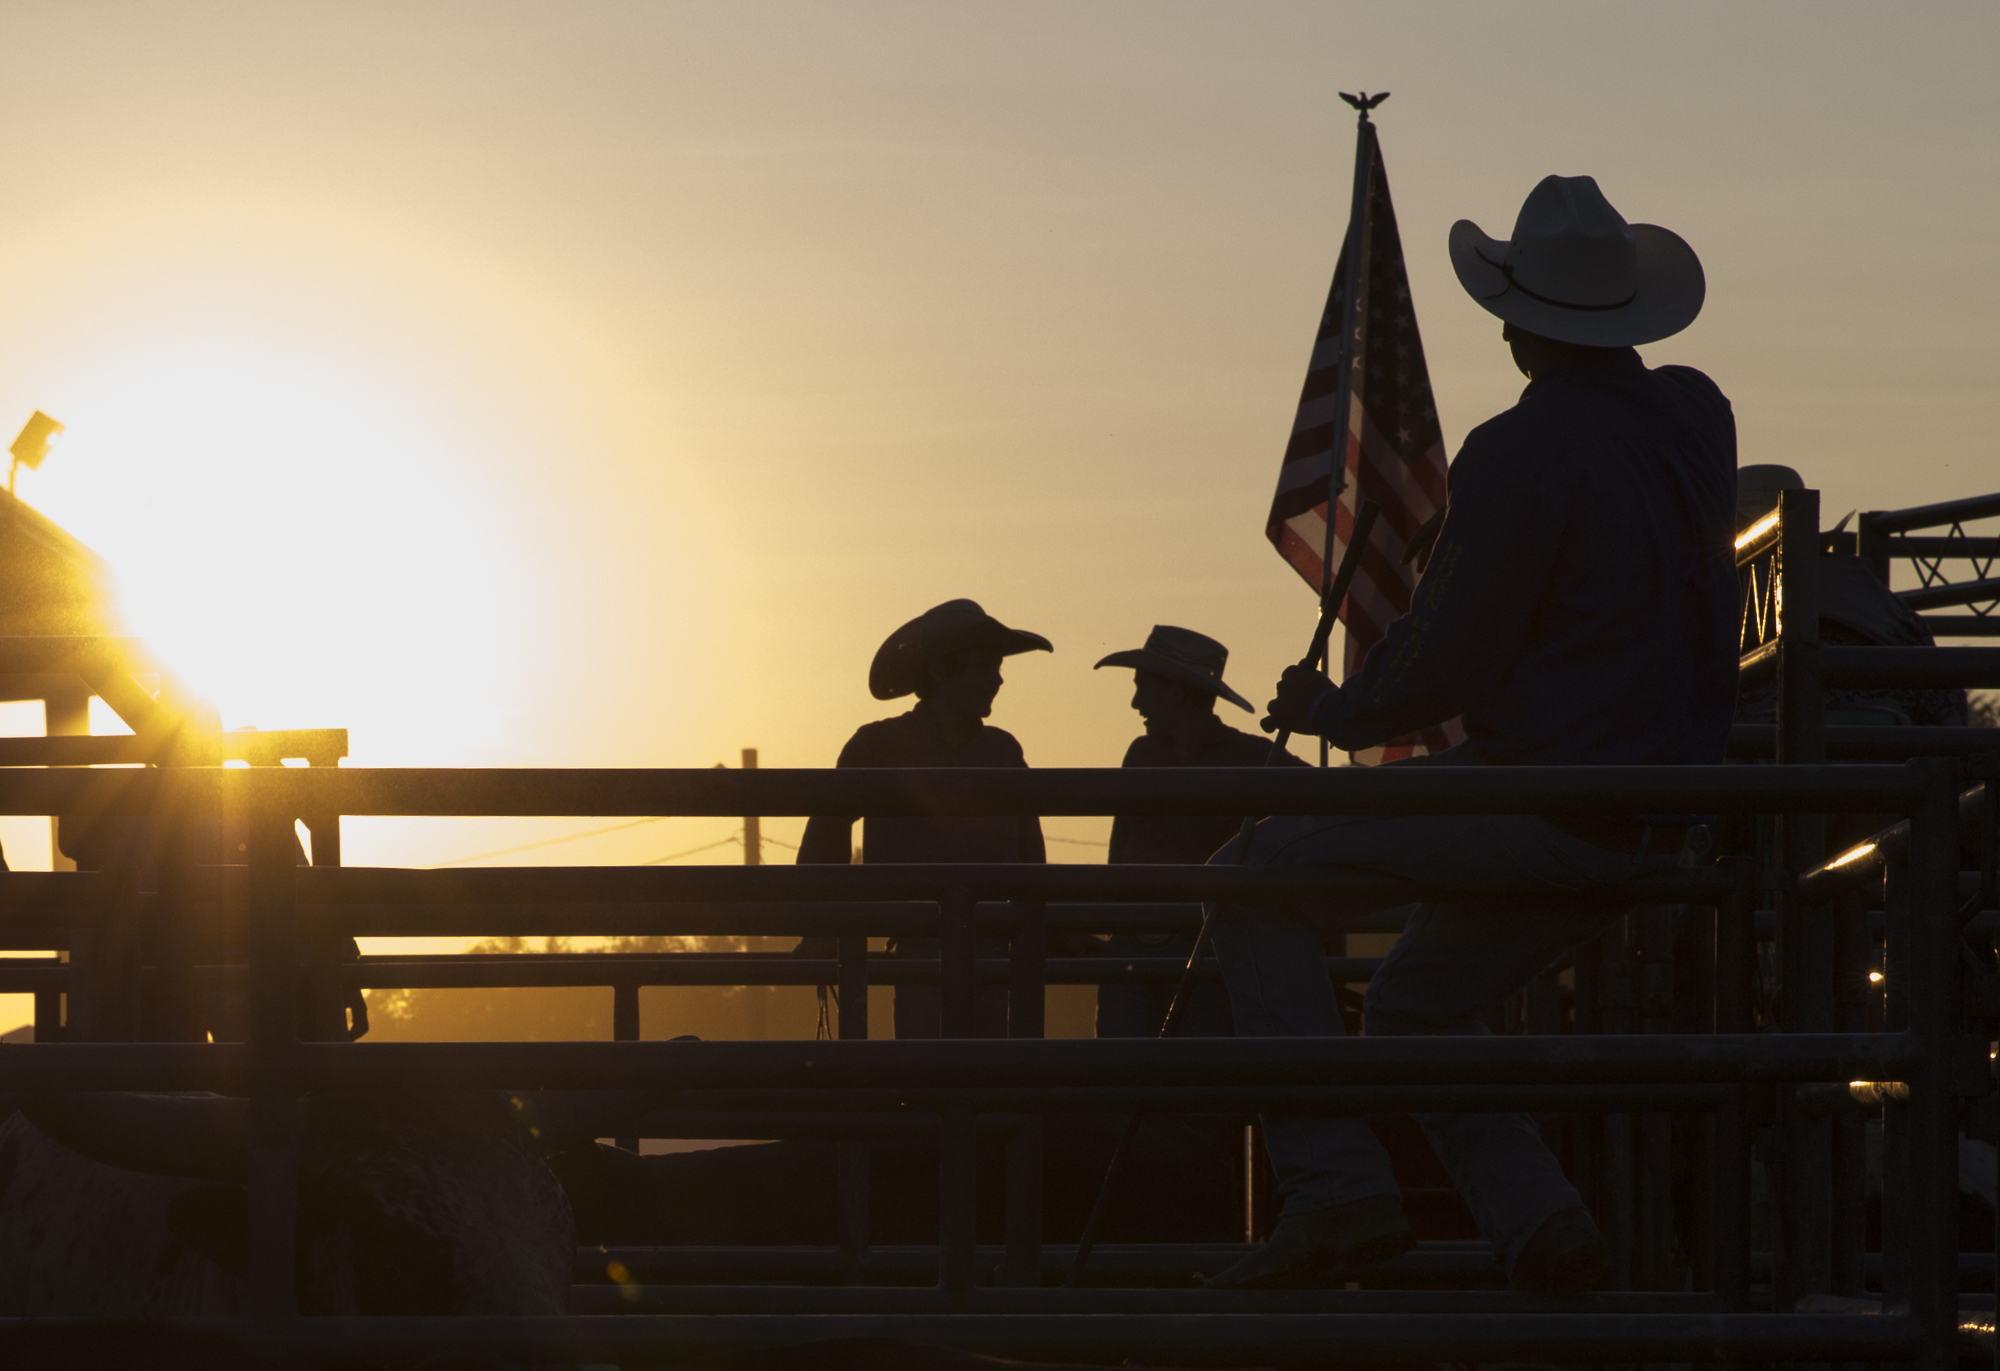  Cowboys await for opening ceremonies to begin at the annual Boys and Bulls Rodeo held at the Fayette County Fair near dusk on August 3, 2017. 